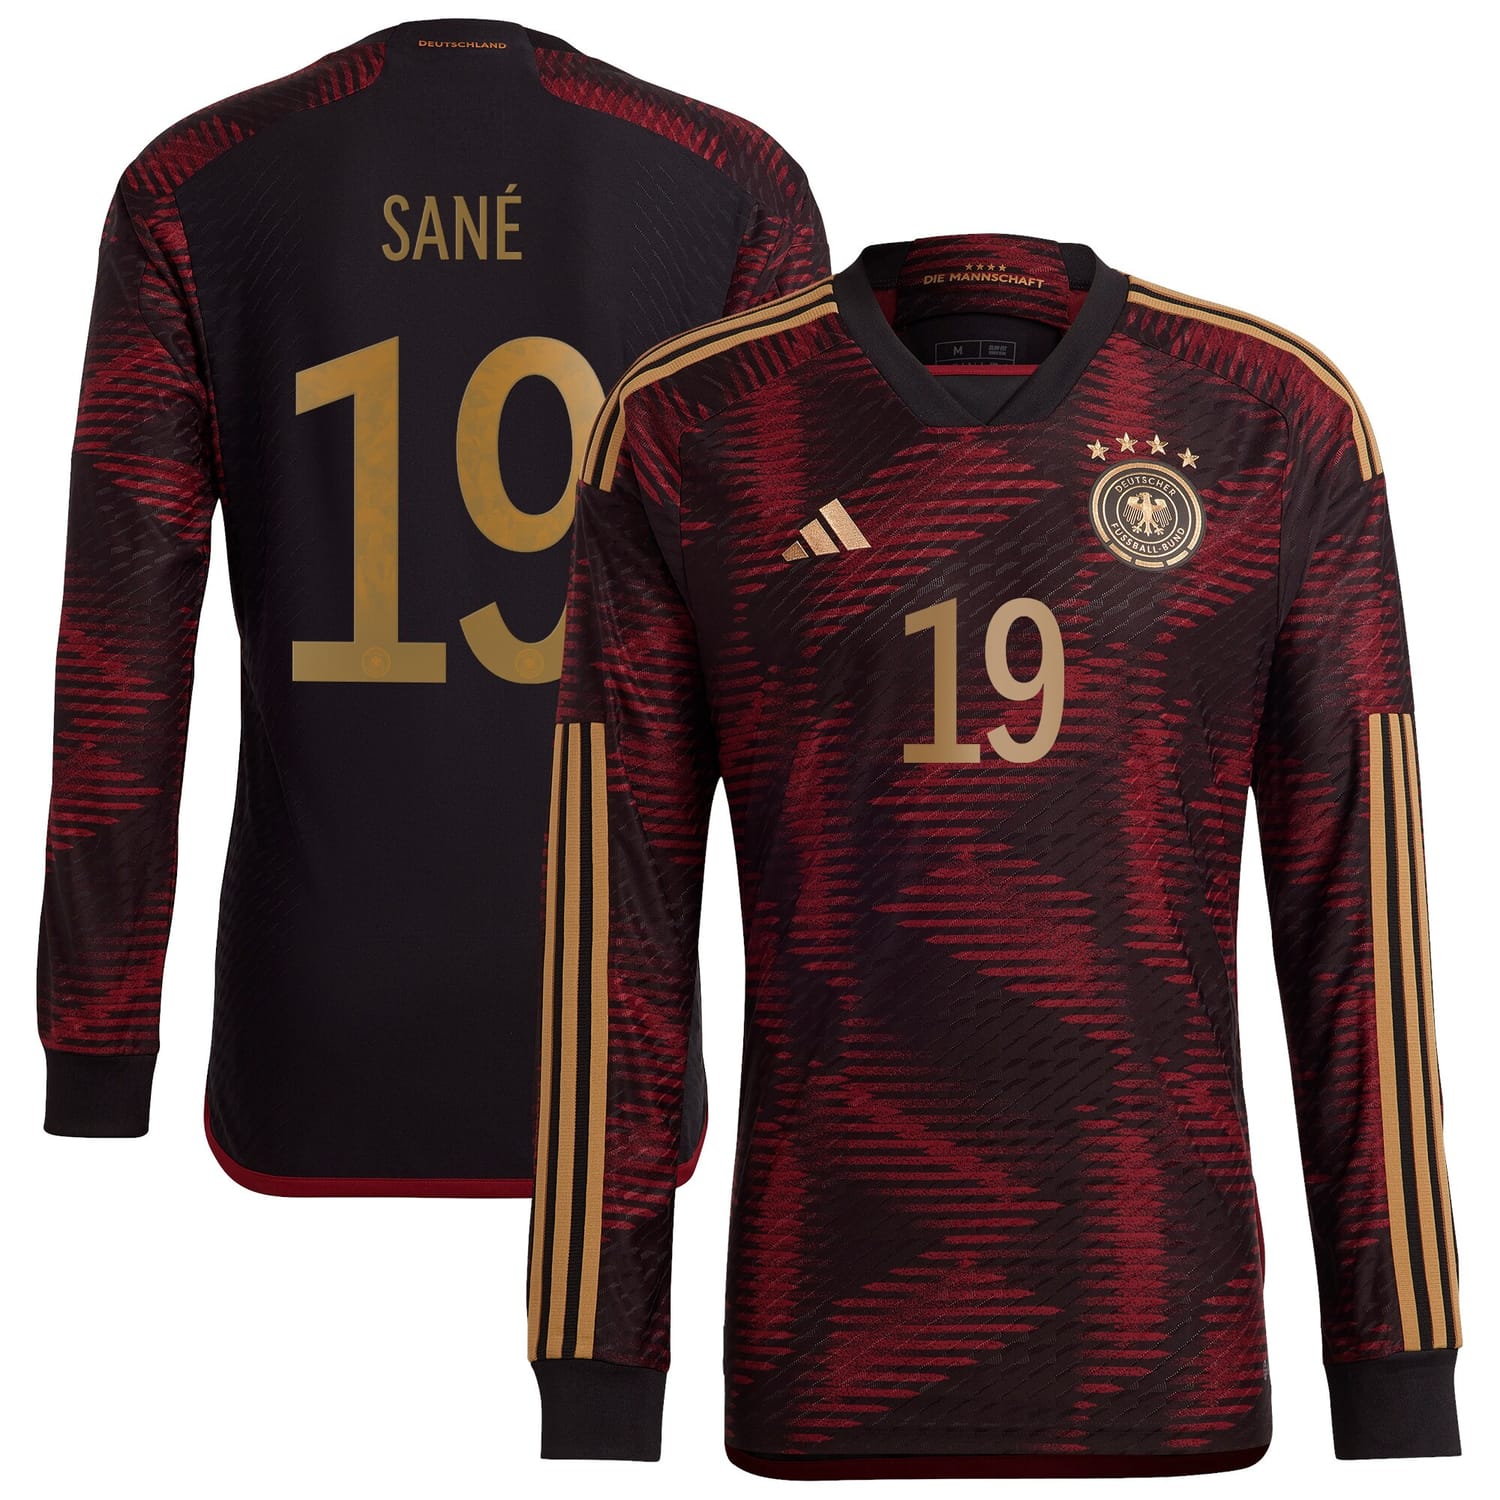 Germany National Team Away Authentic Jersey Shirt Long Sleeve player Leroy Sané 19 printing for Men